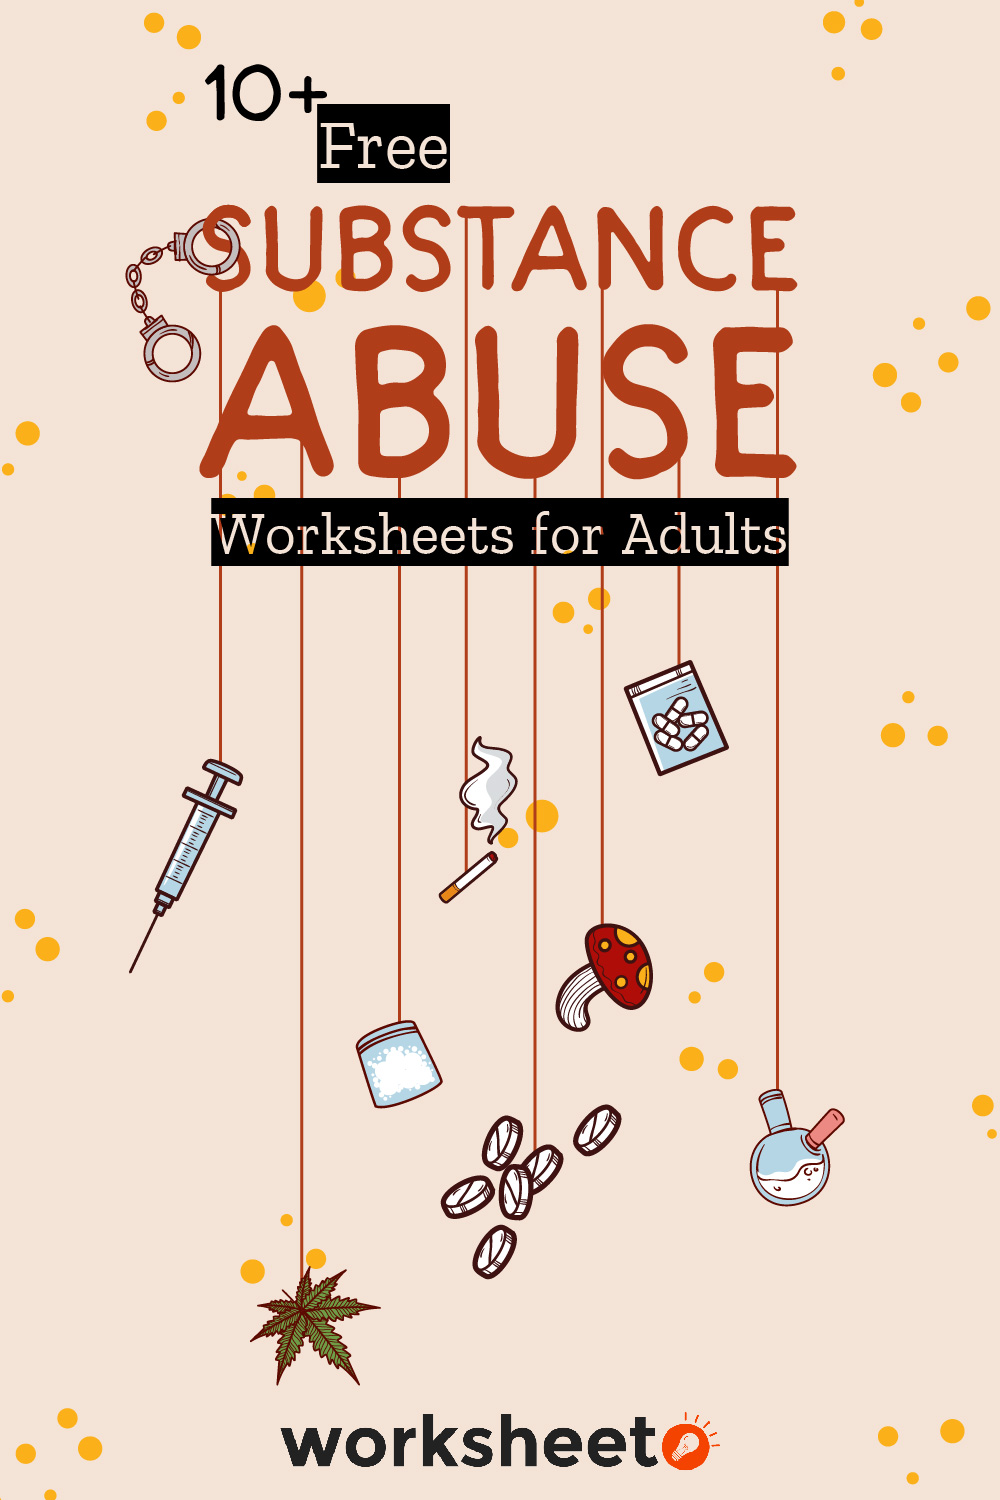 Free Substance Abuse Worksheets for Adults